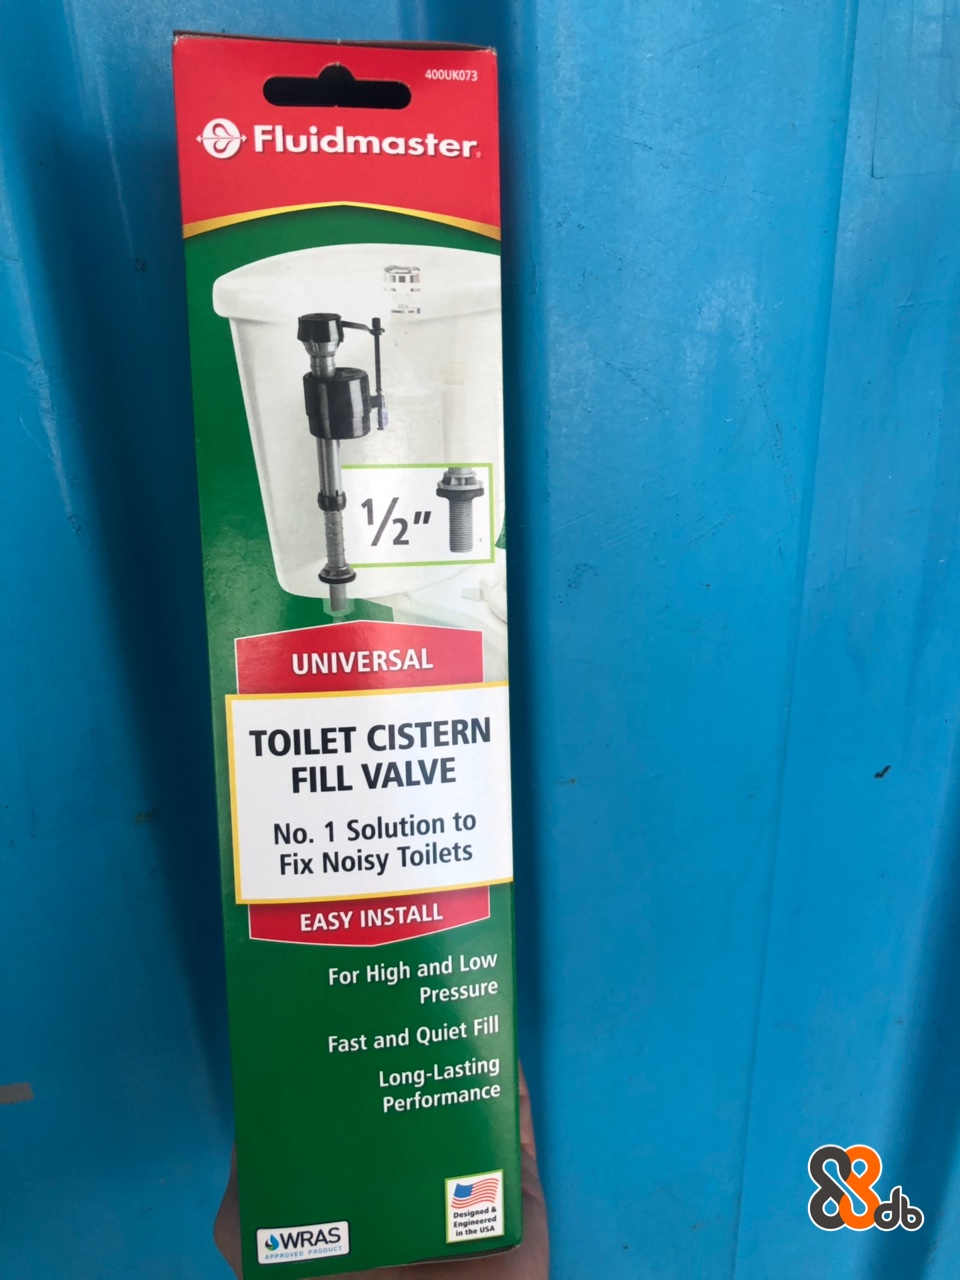 400UK073 Fluidmaster UNIVERSAL TOILET CISTERN FILL VALVE No. 1 Solution to Fix Noisy Toilets EASY INSTALL For High and Low Pressure Fast and Quiet Fill Long-Lasting Performance WRAS in the USA  